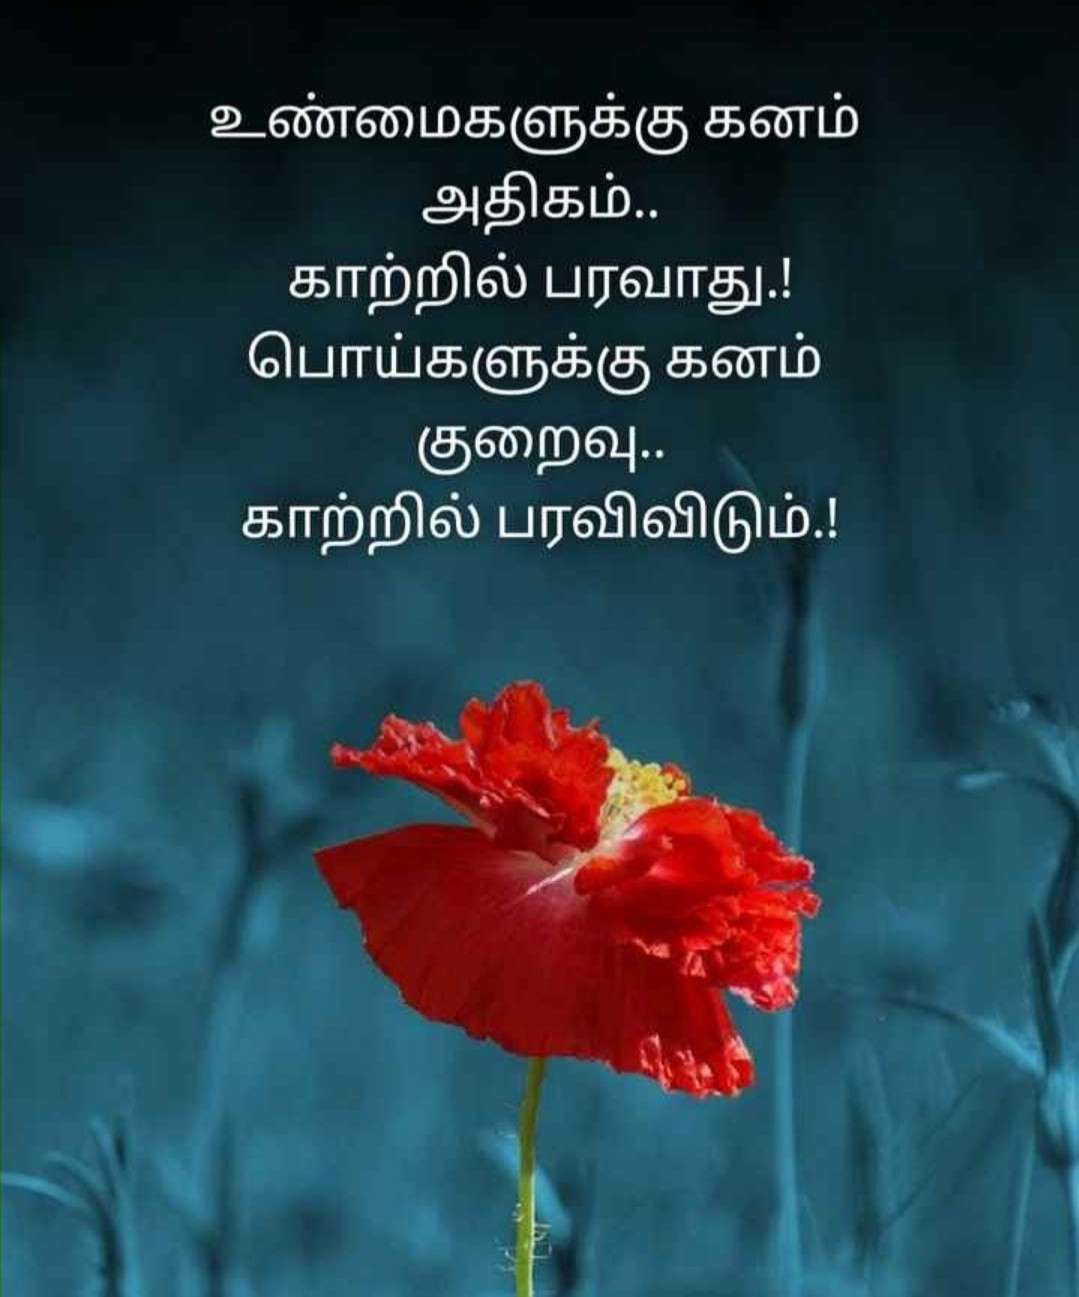 Tamil Motivational Quotes Photos & Images